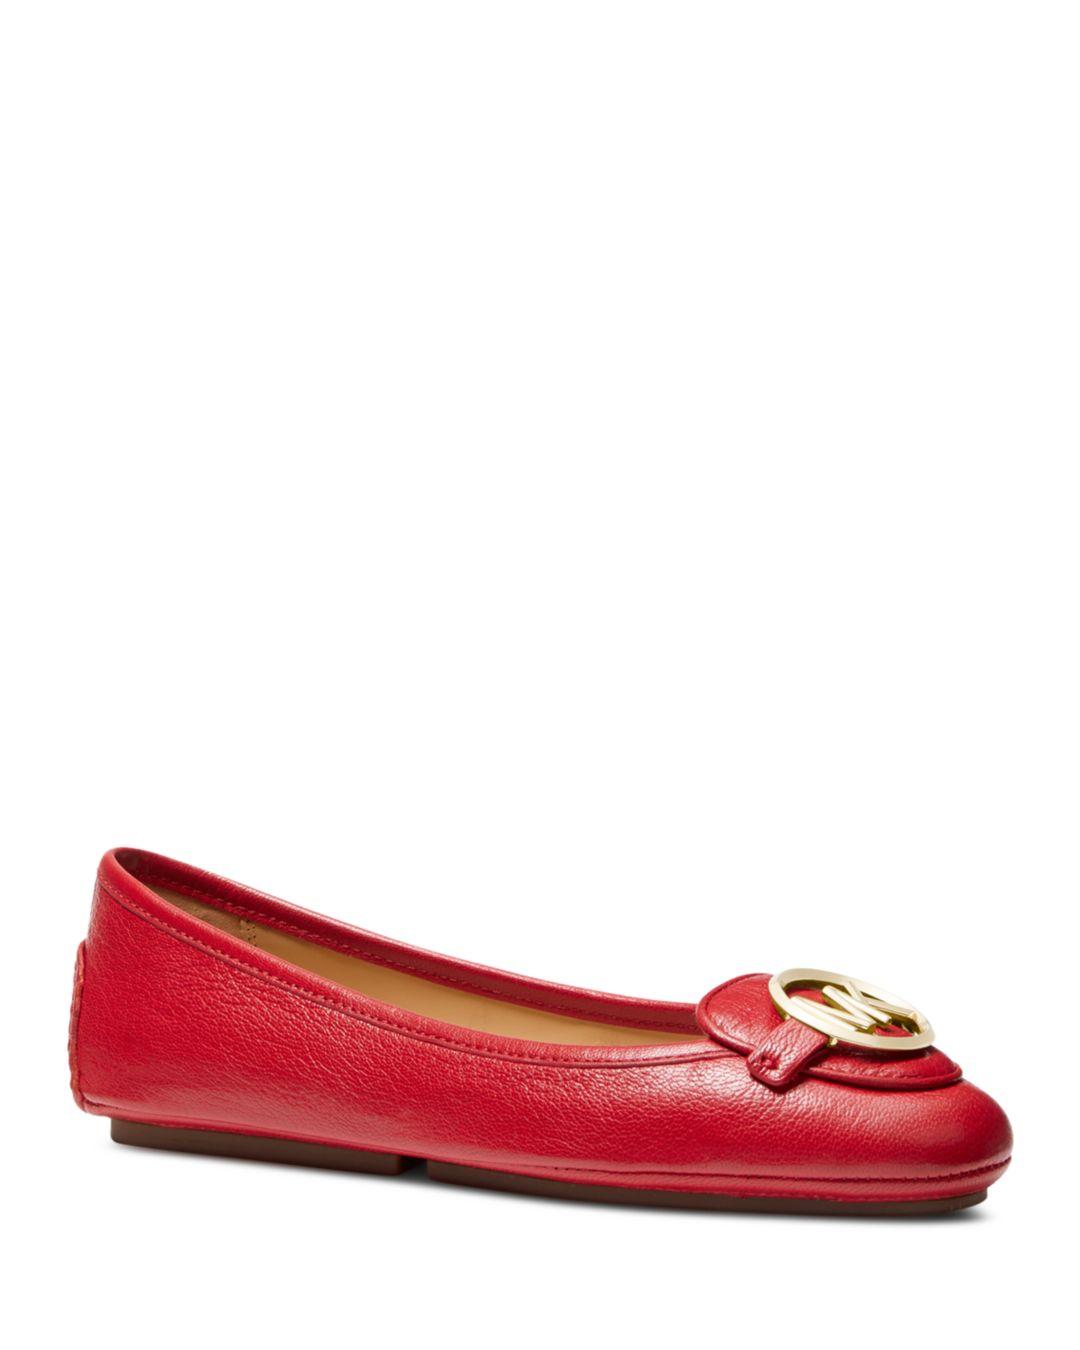 MICHAEL Michael Kors Women's Lillie Embellished Moccasin Flats in Red ...